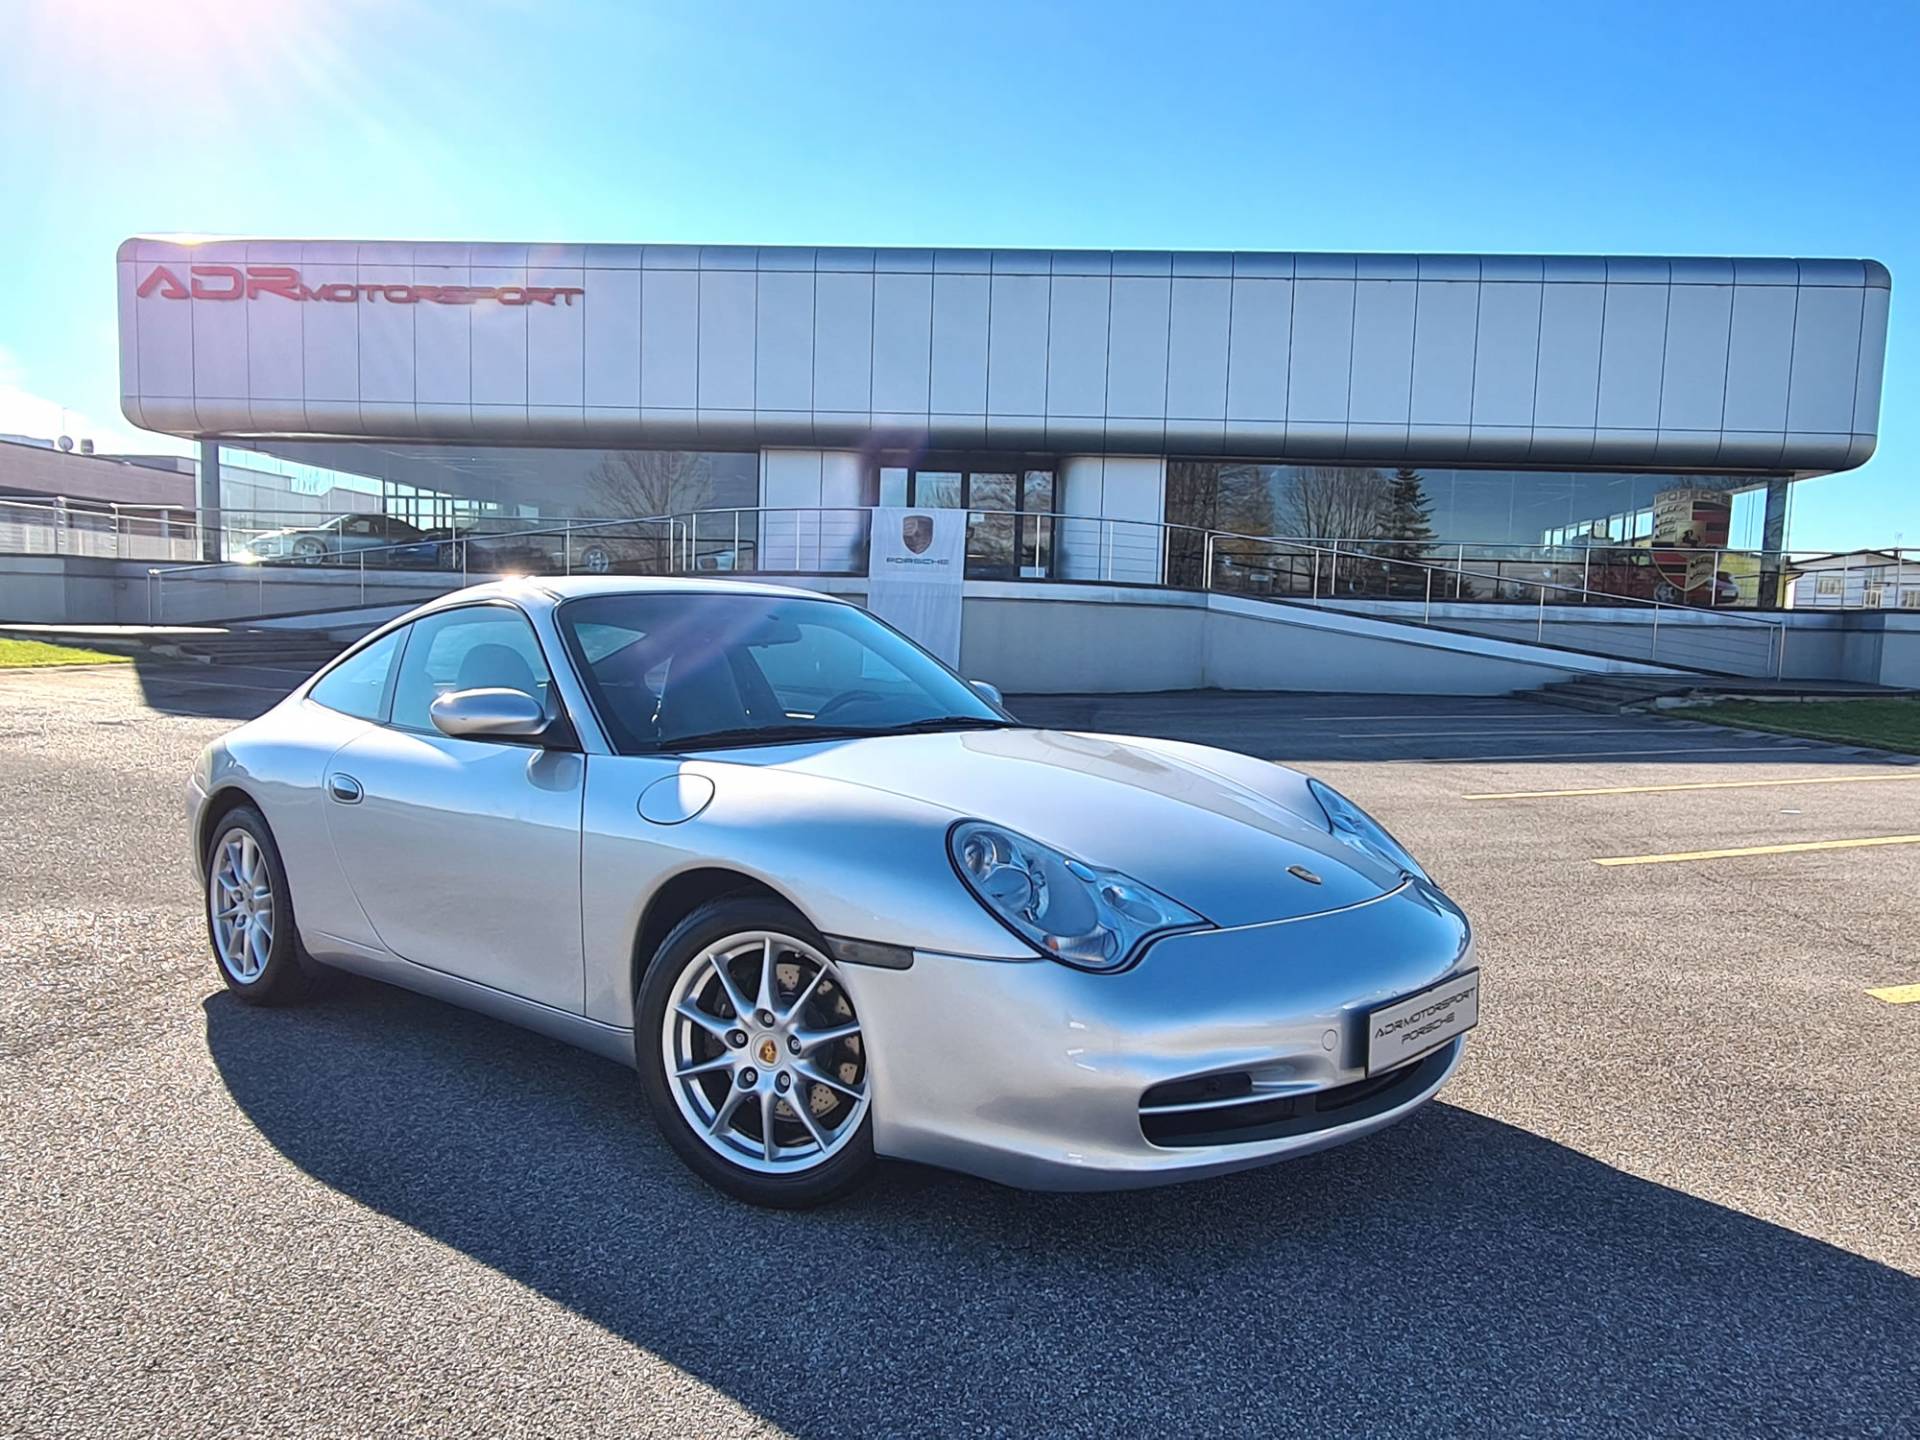 For Sale: Porsche 911 Carrera (2003) offered for $73,404